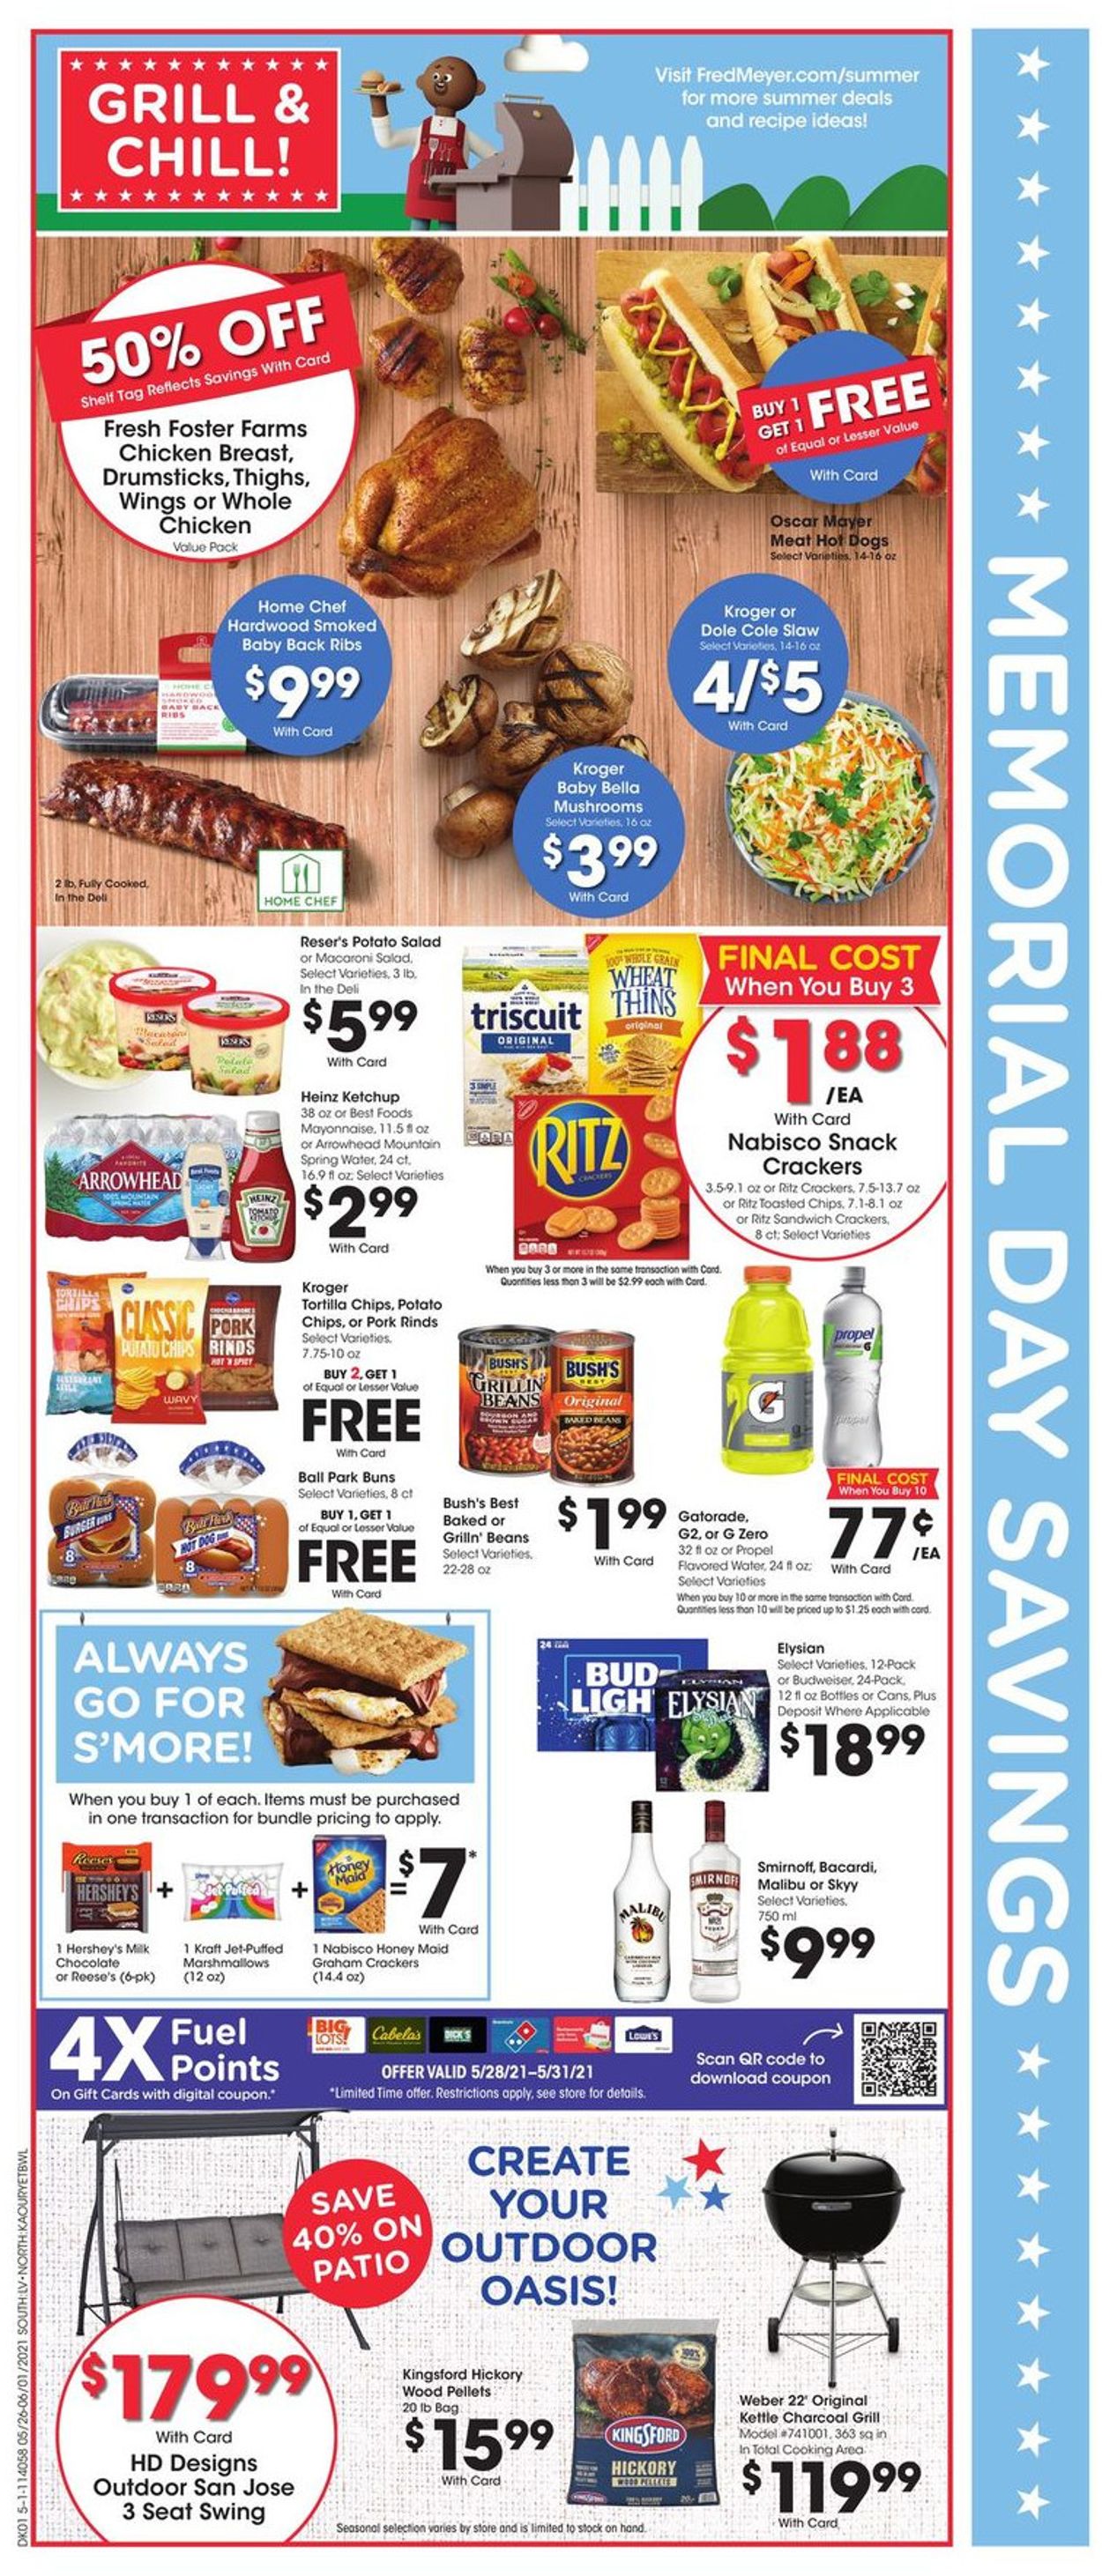 Fred Meyer Weekly Ad Circular - valid 05/26-06/01/2021 (Page 2)